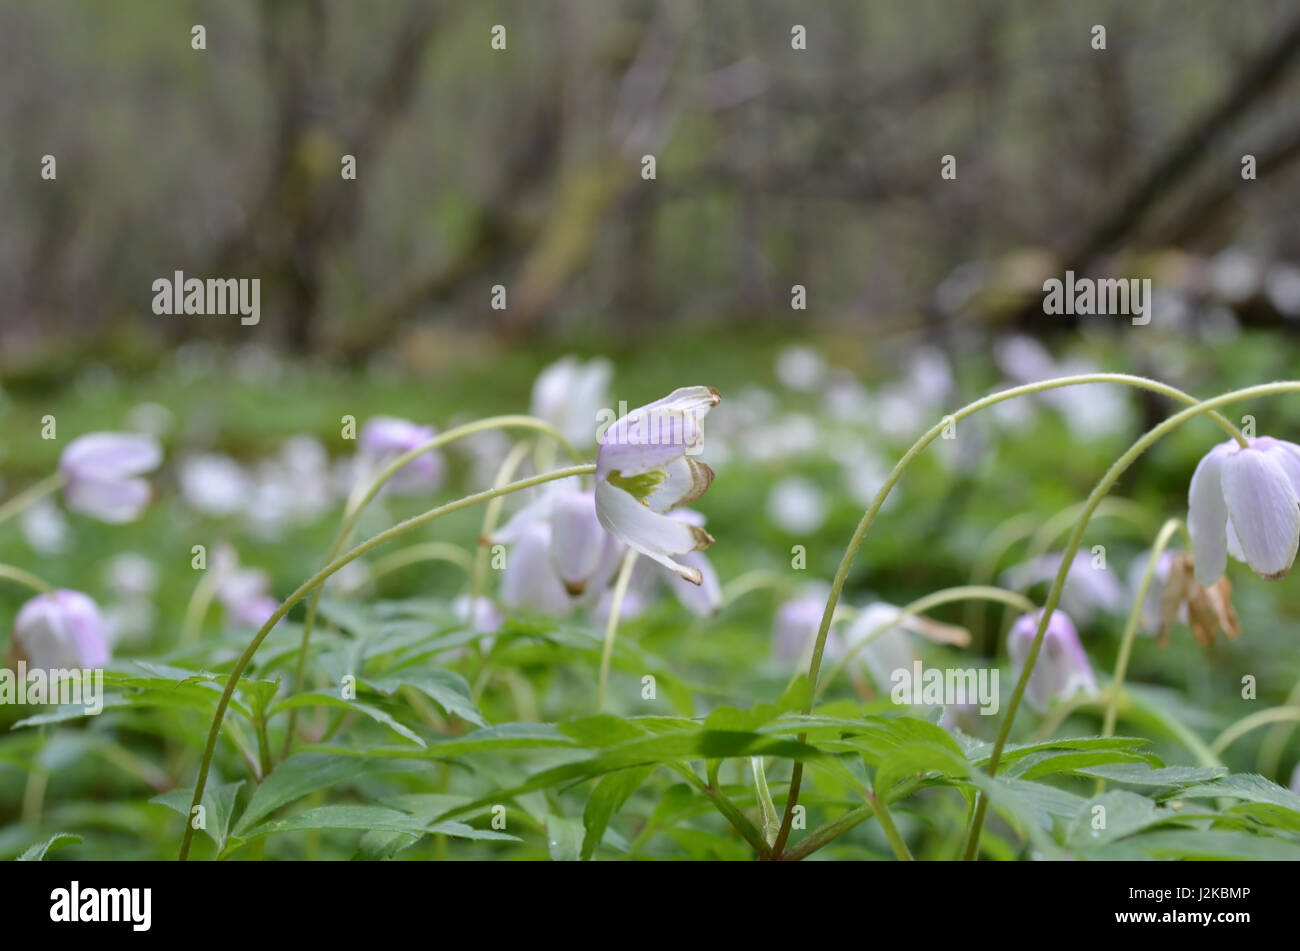 European wood anemones in forest landscape Stock Photo